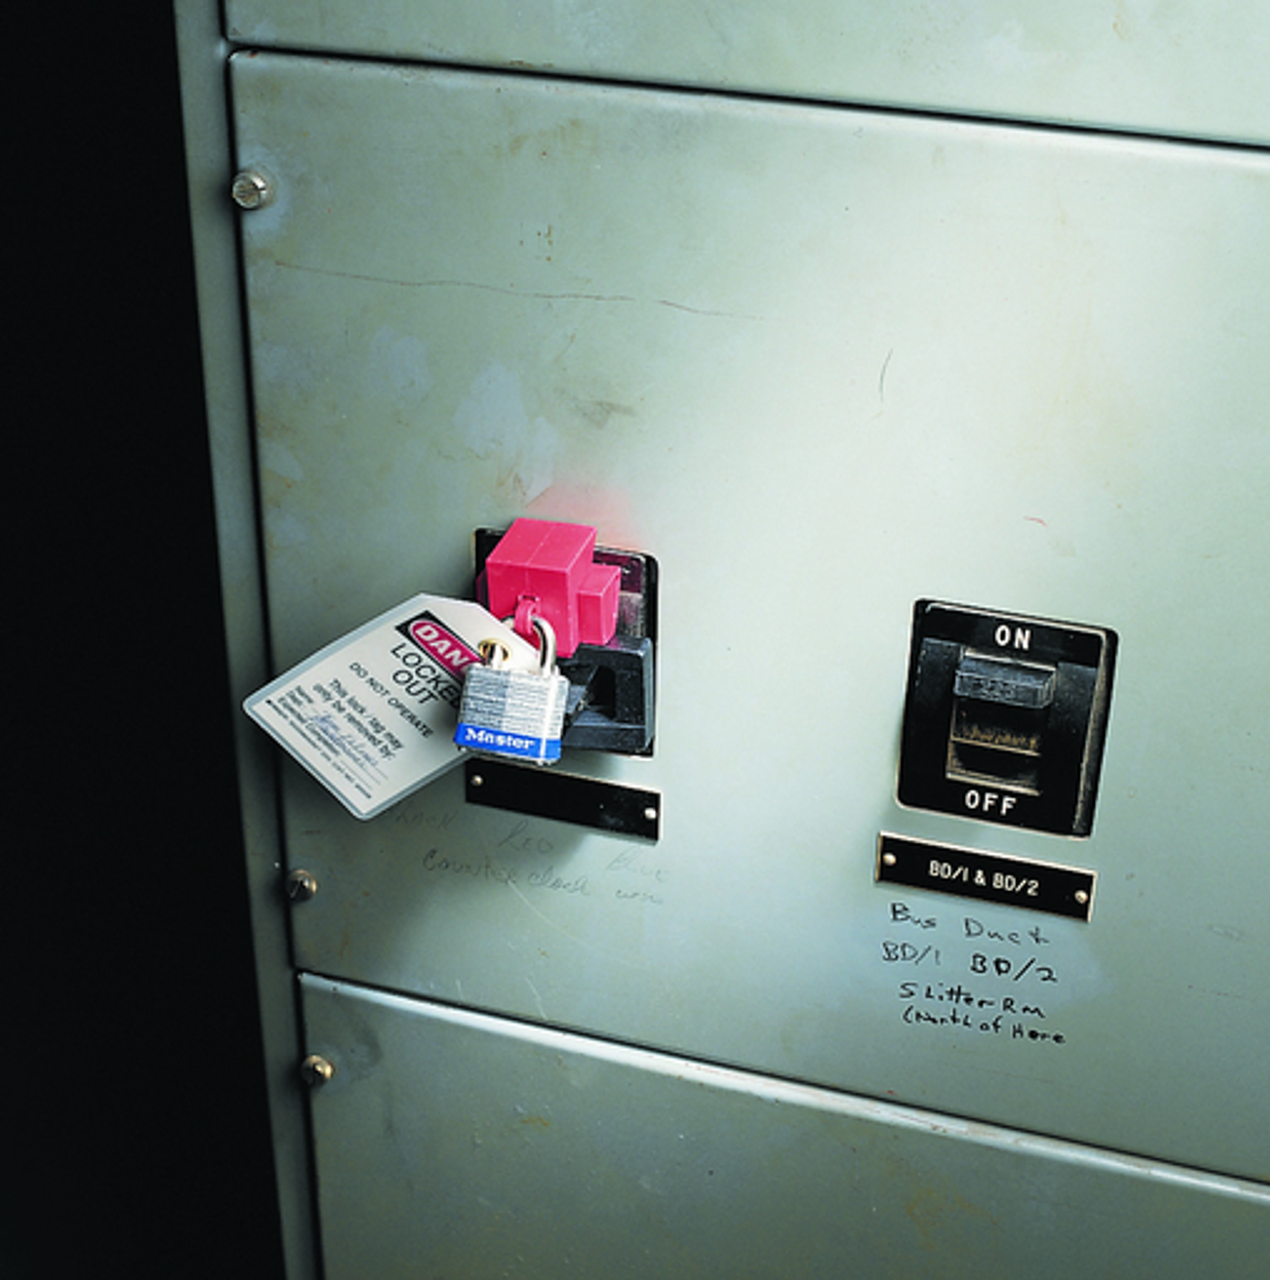 Large Circuit Breaker Lockout Device
Pictured in use